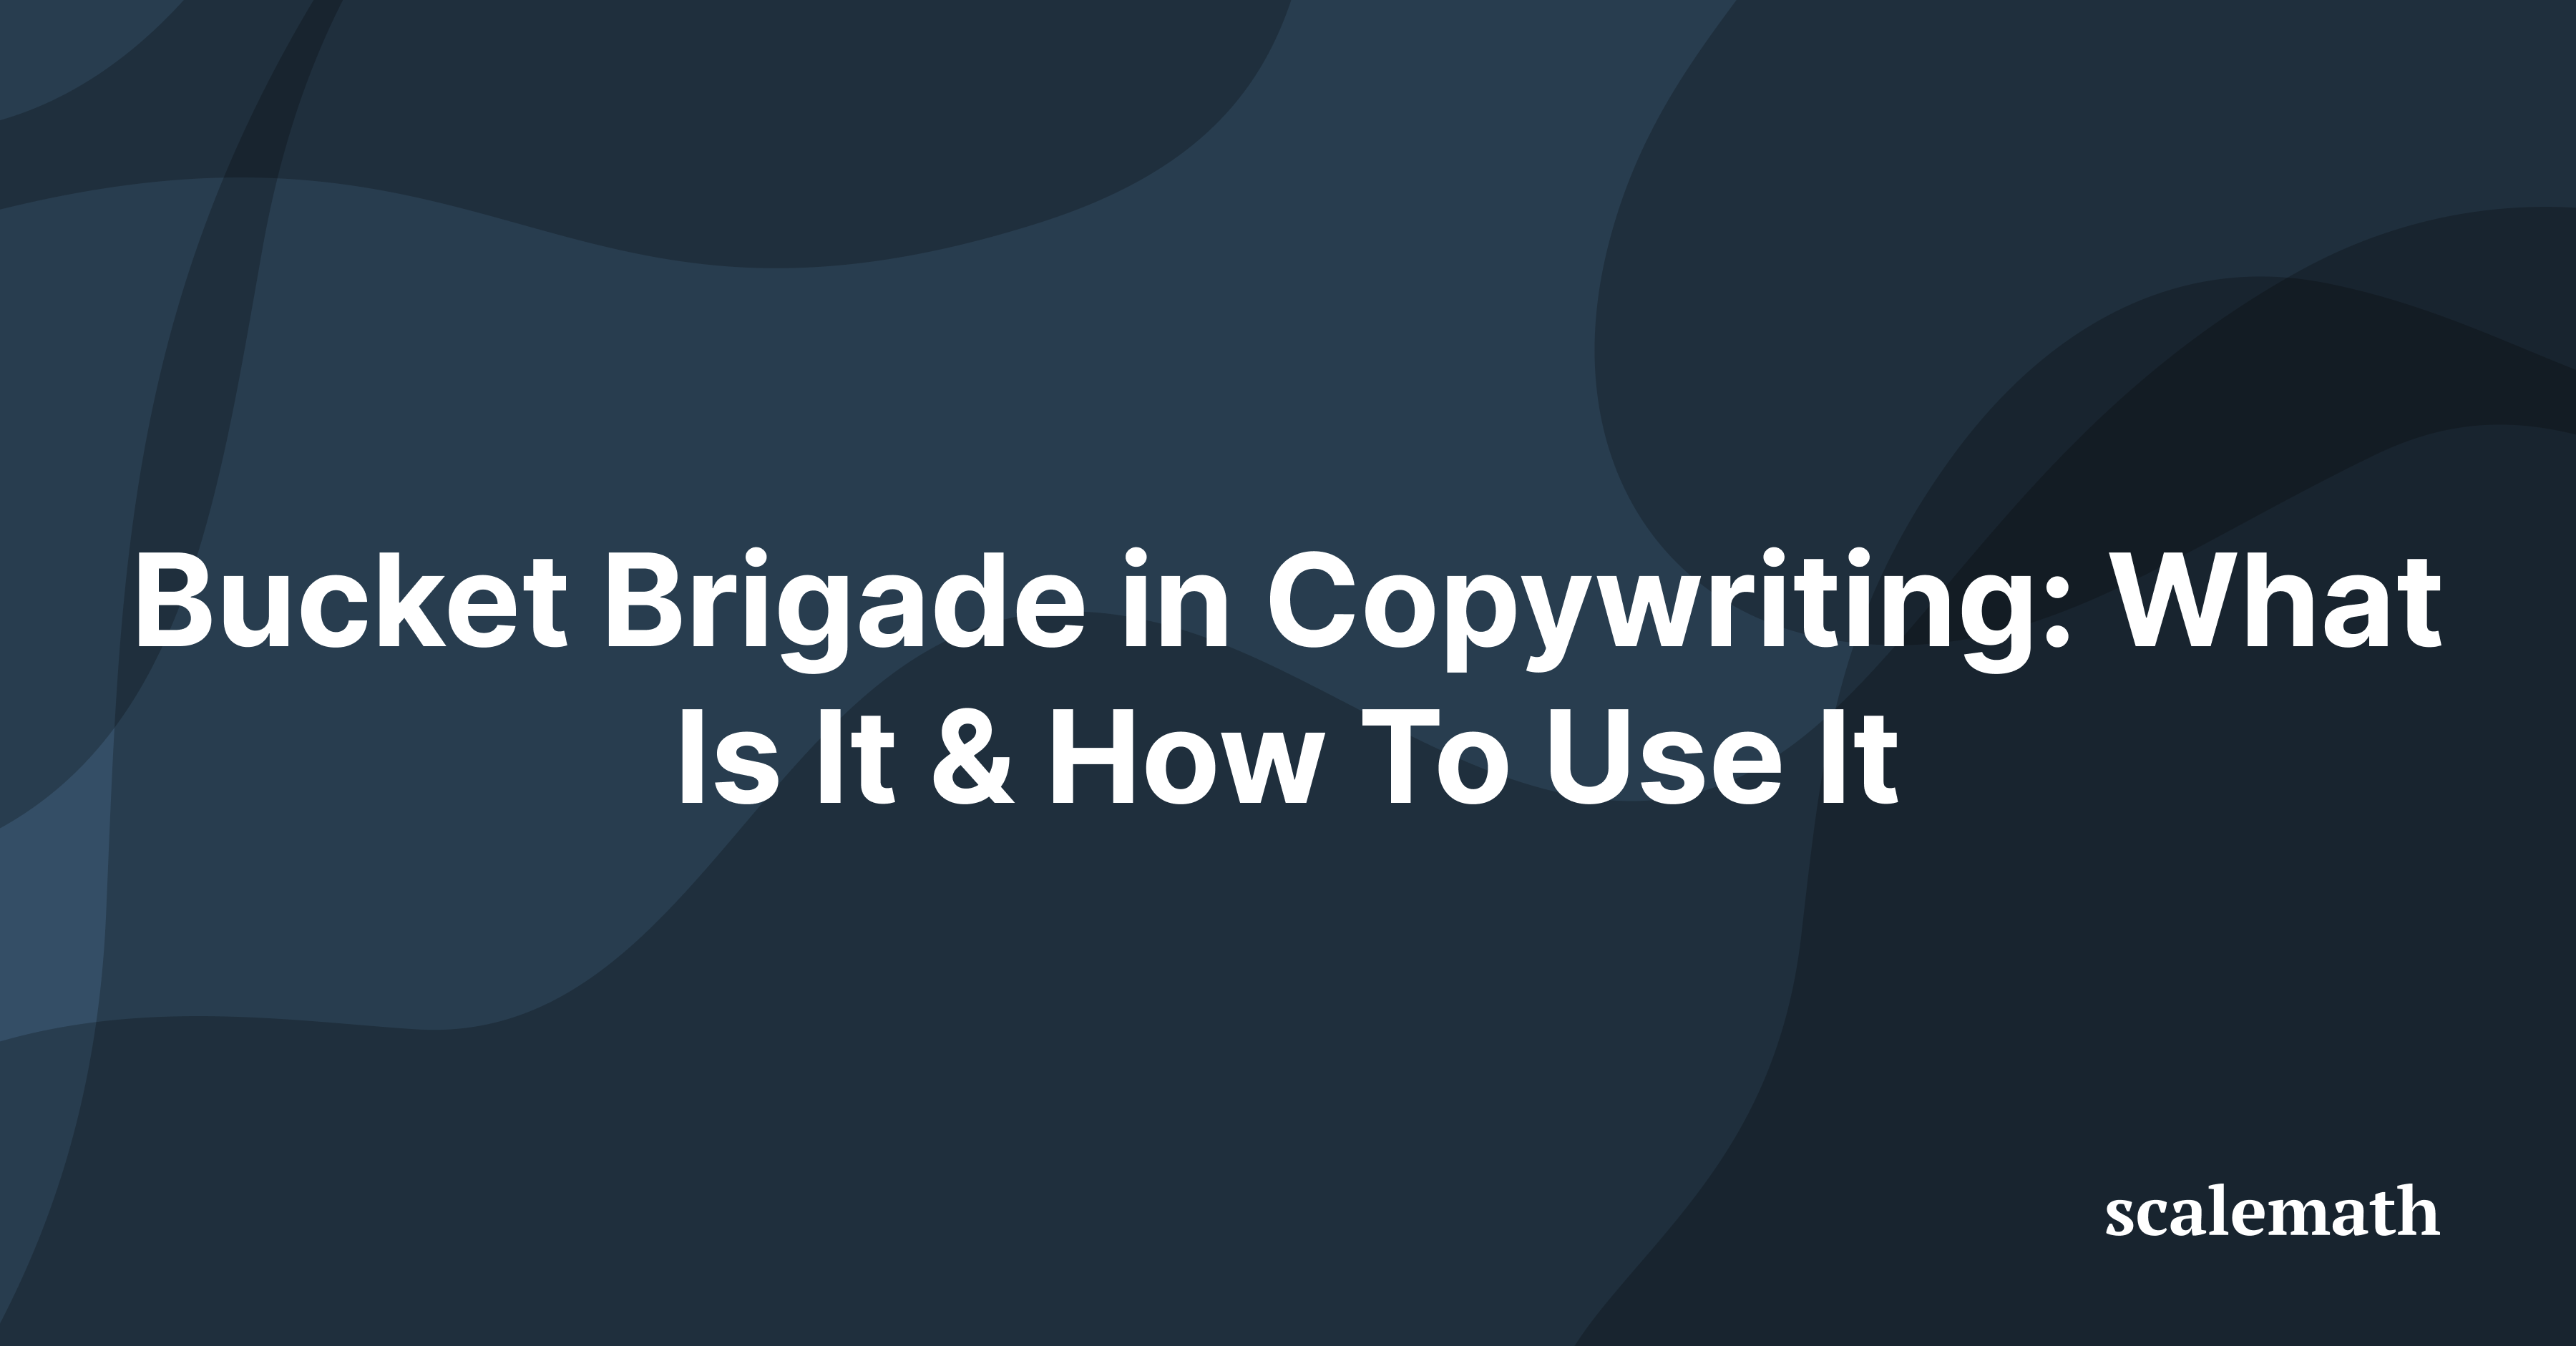 Bucket Brigade in Copywriting: What Is It & How To Use It